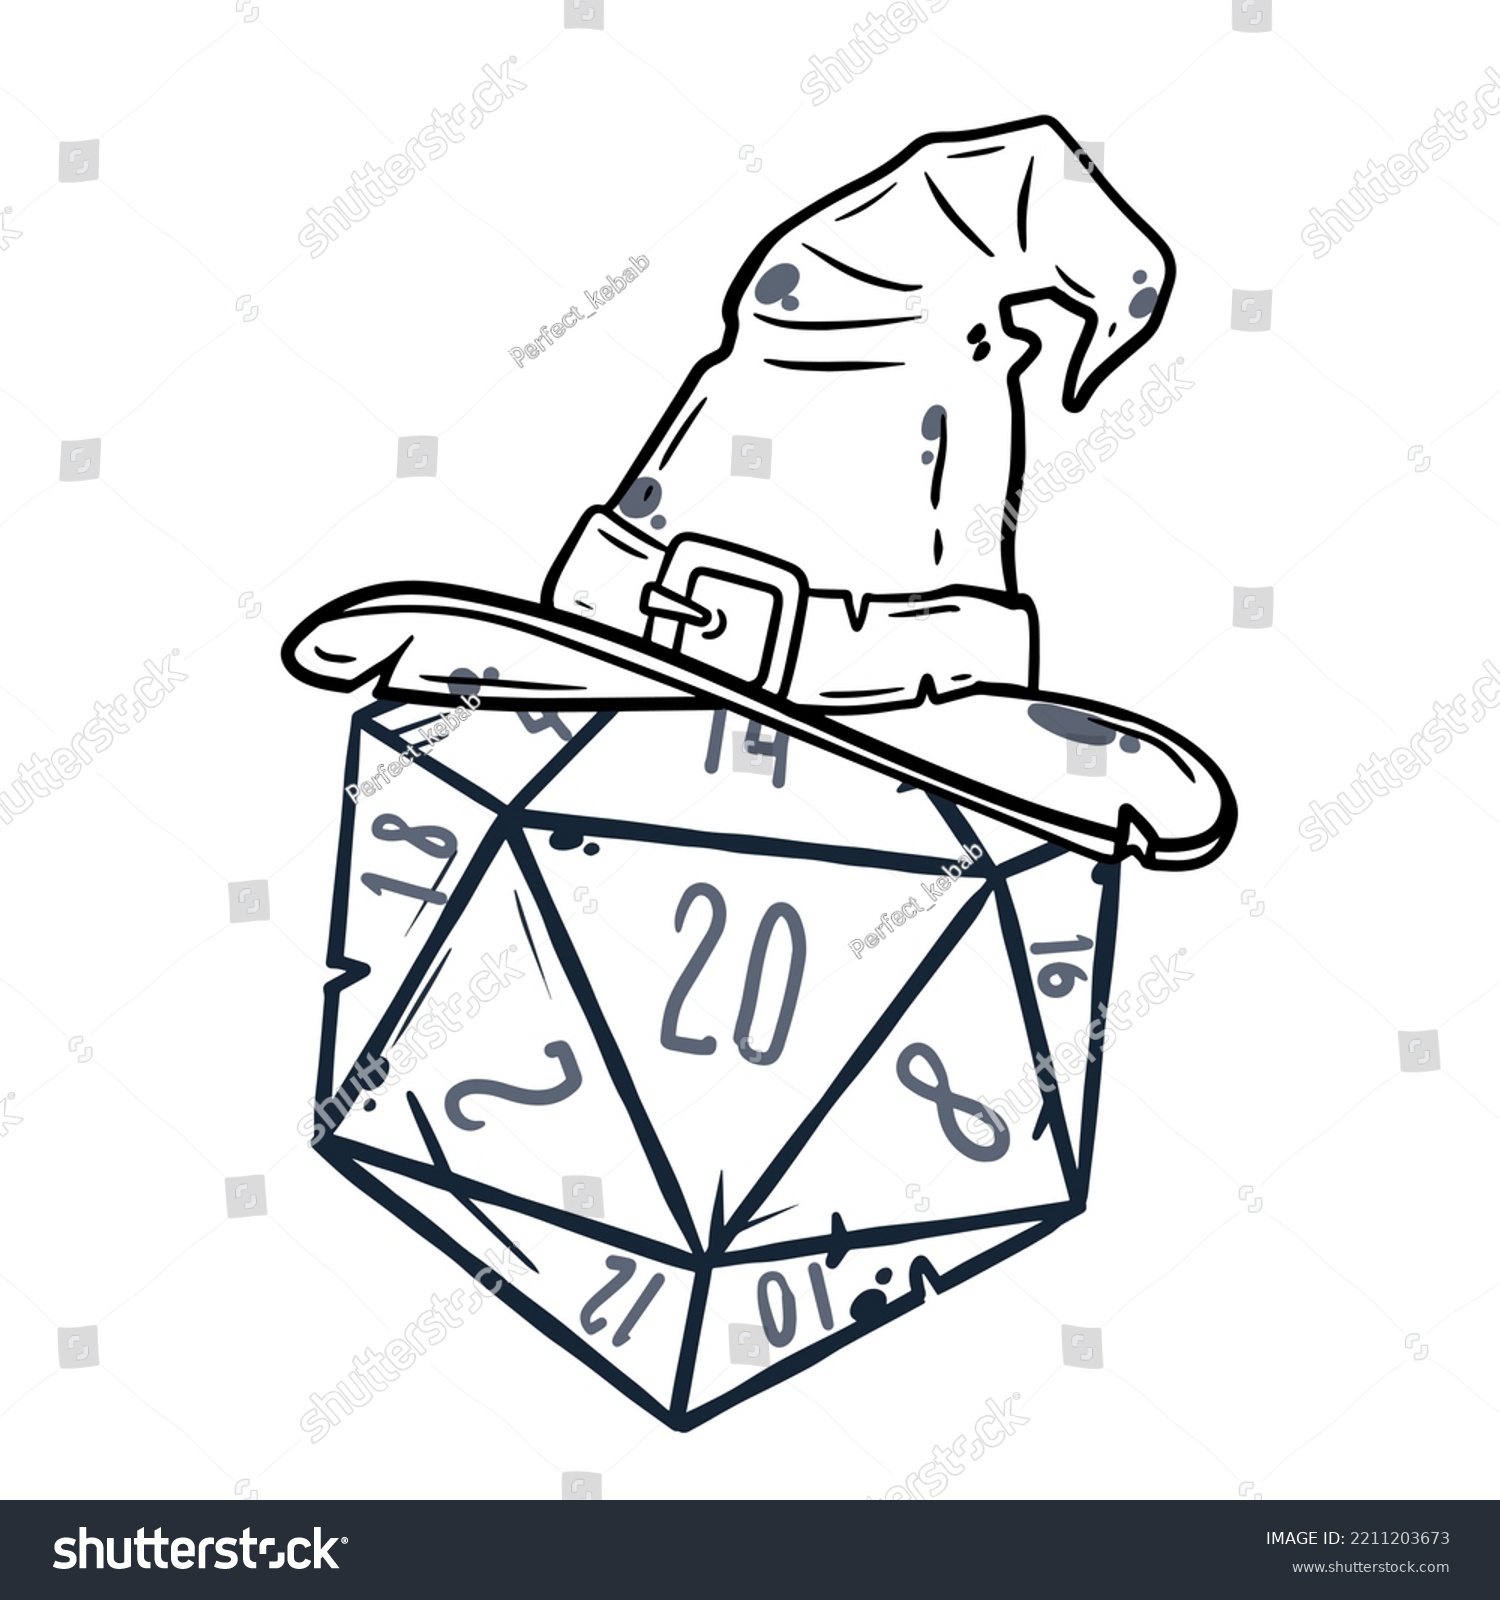 SVG of Dice for playing DnD. Tabletop role-playing game Dungeon and dragons with d20. Magical role of sorcerer with witch hat. svg